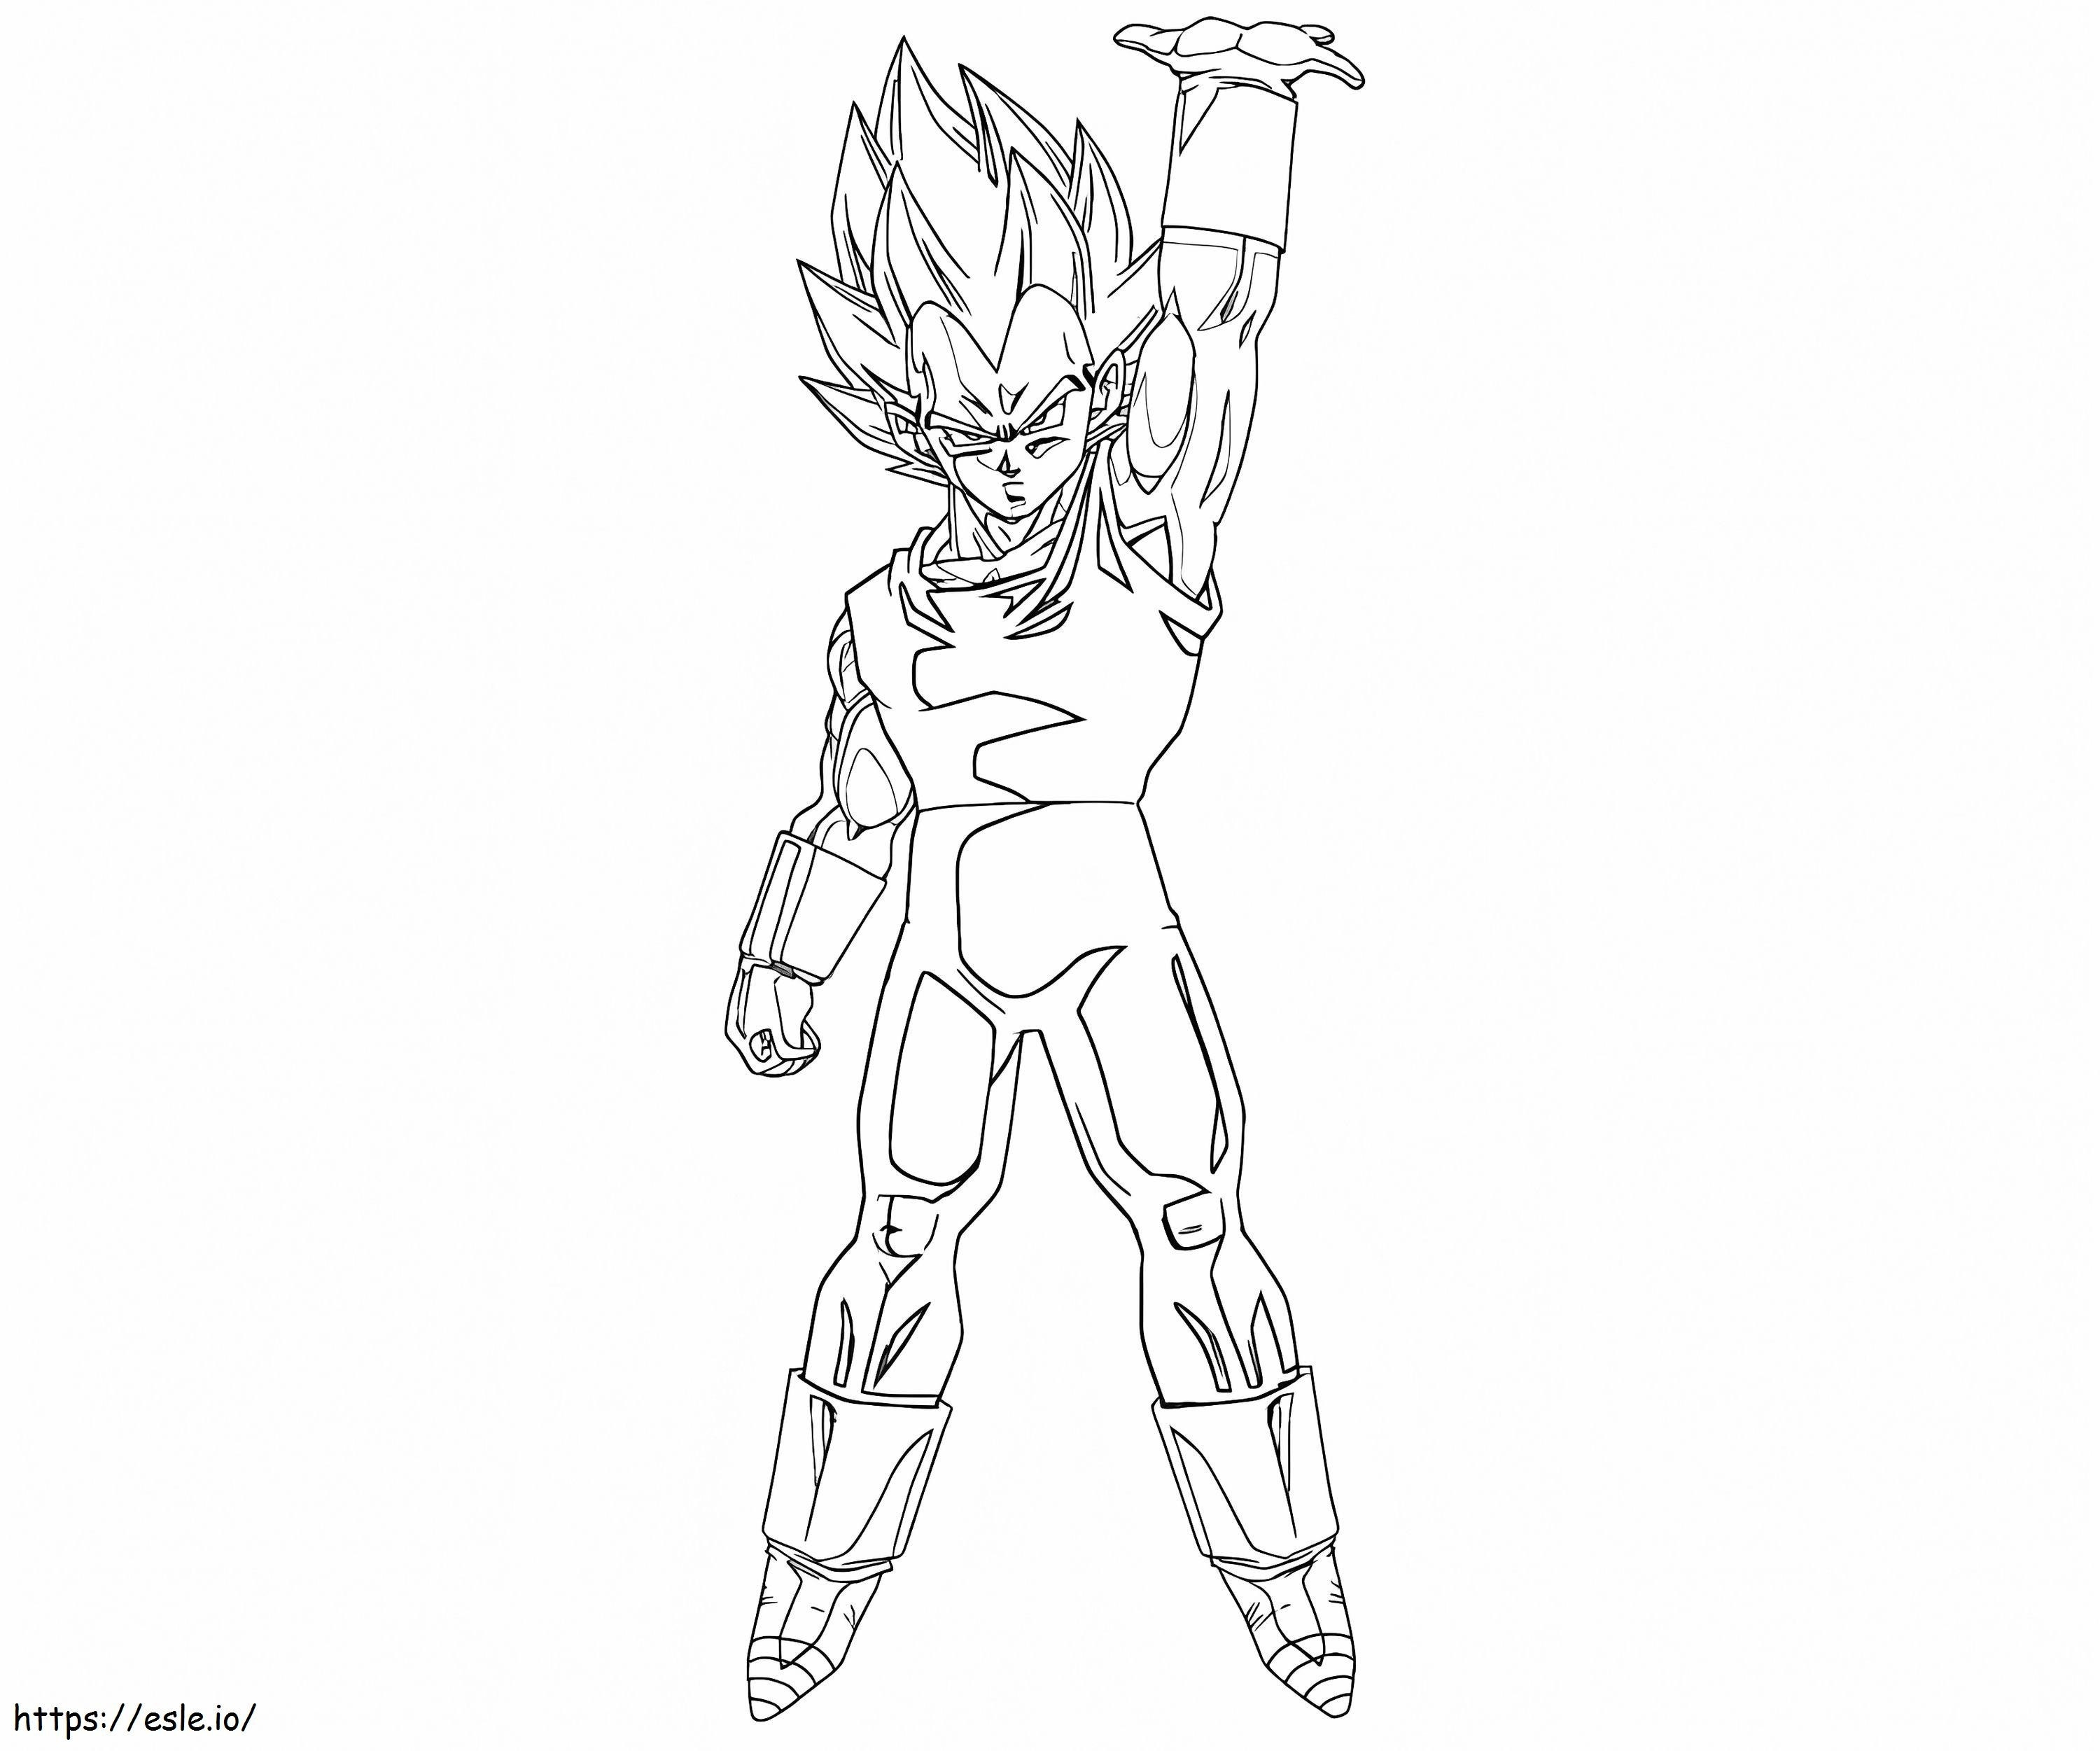 Vegeta Energy coloring page